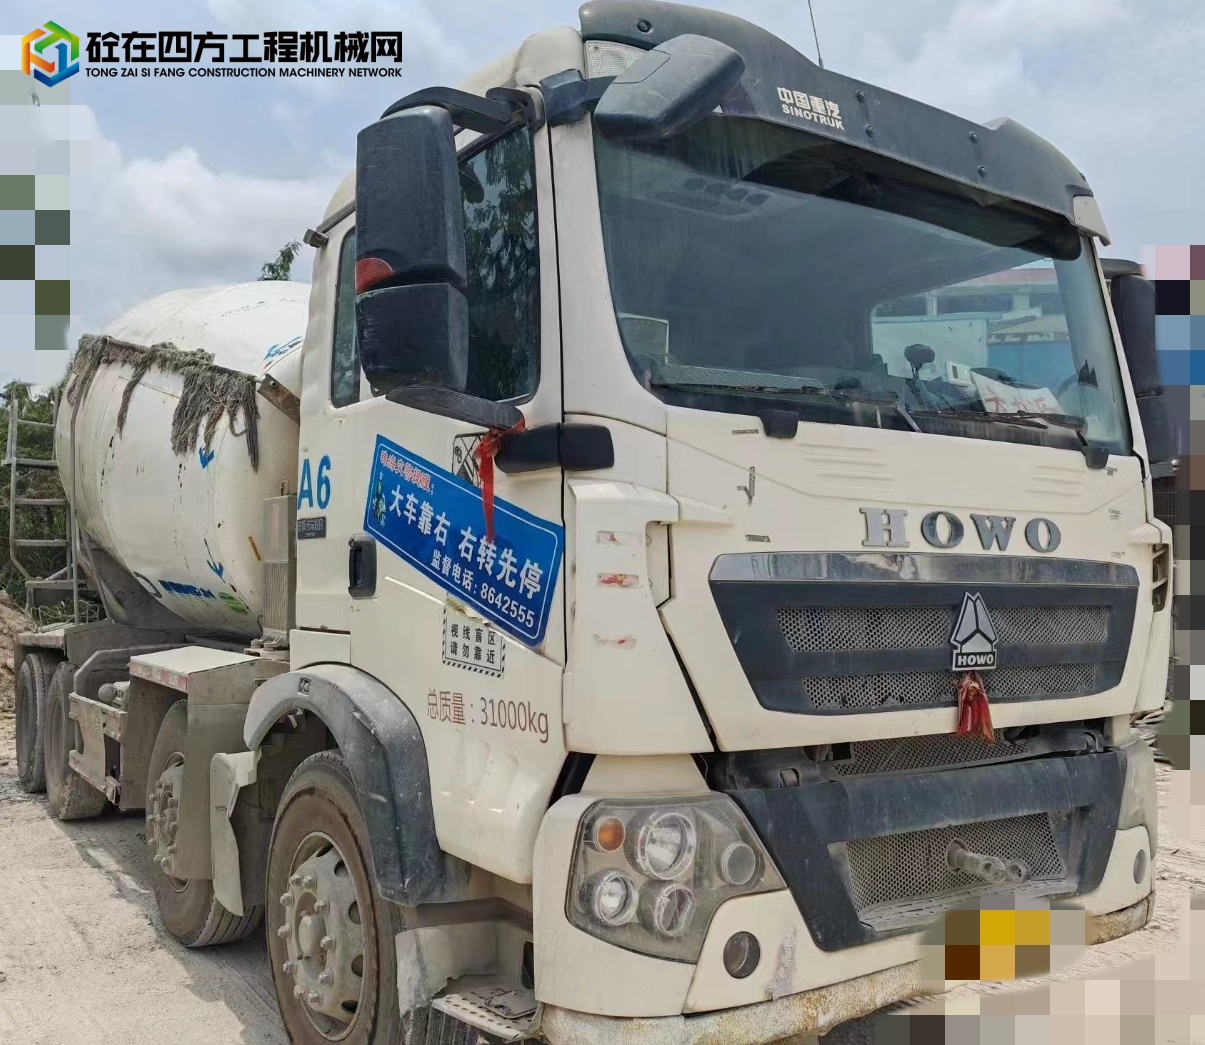 https://images.tongzsf.com/tong/truck_machine/20240425/16629c55a603ab.jpg